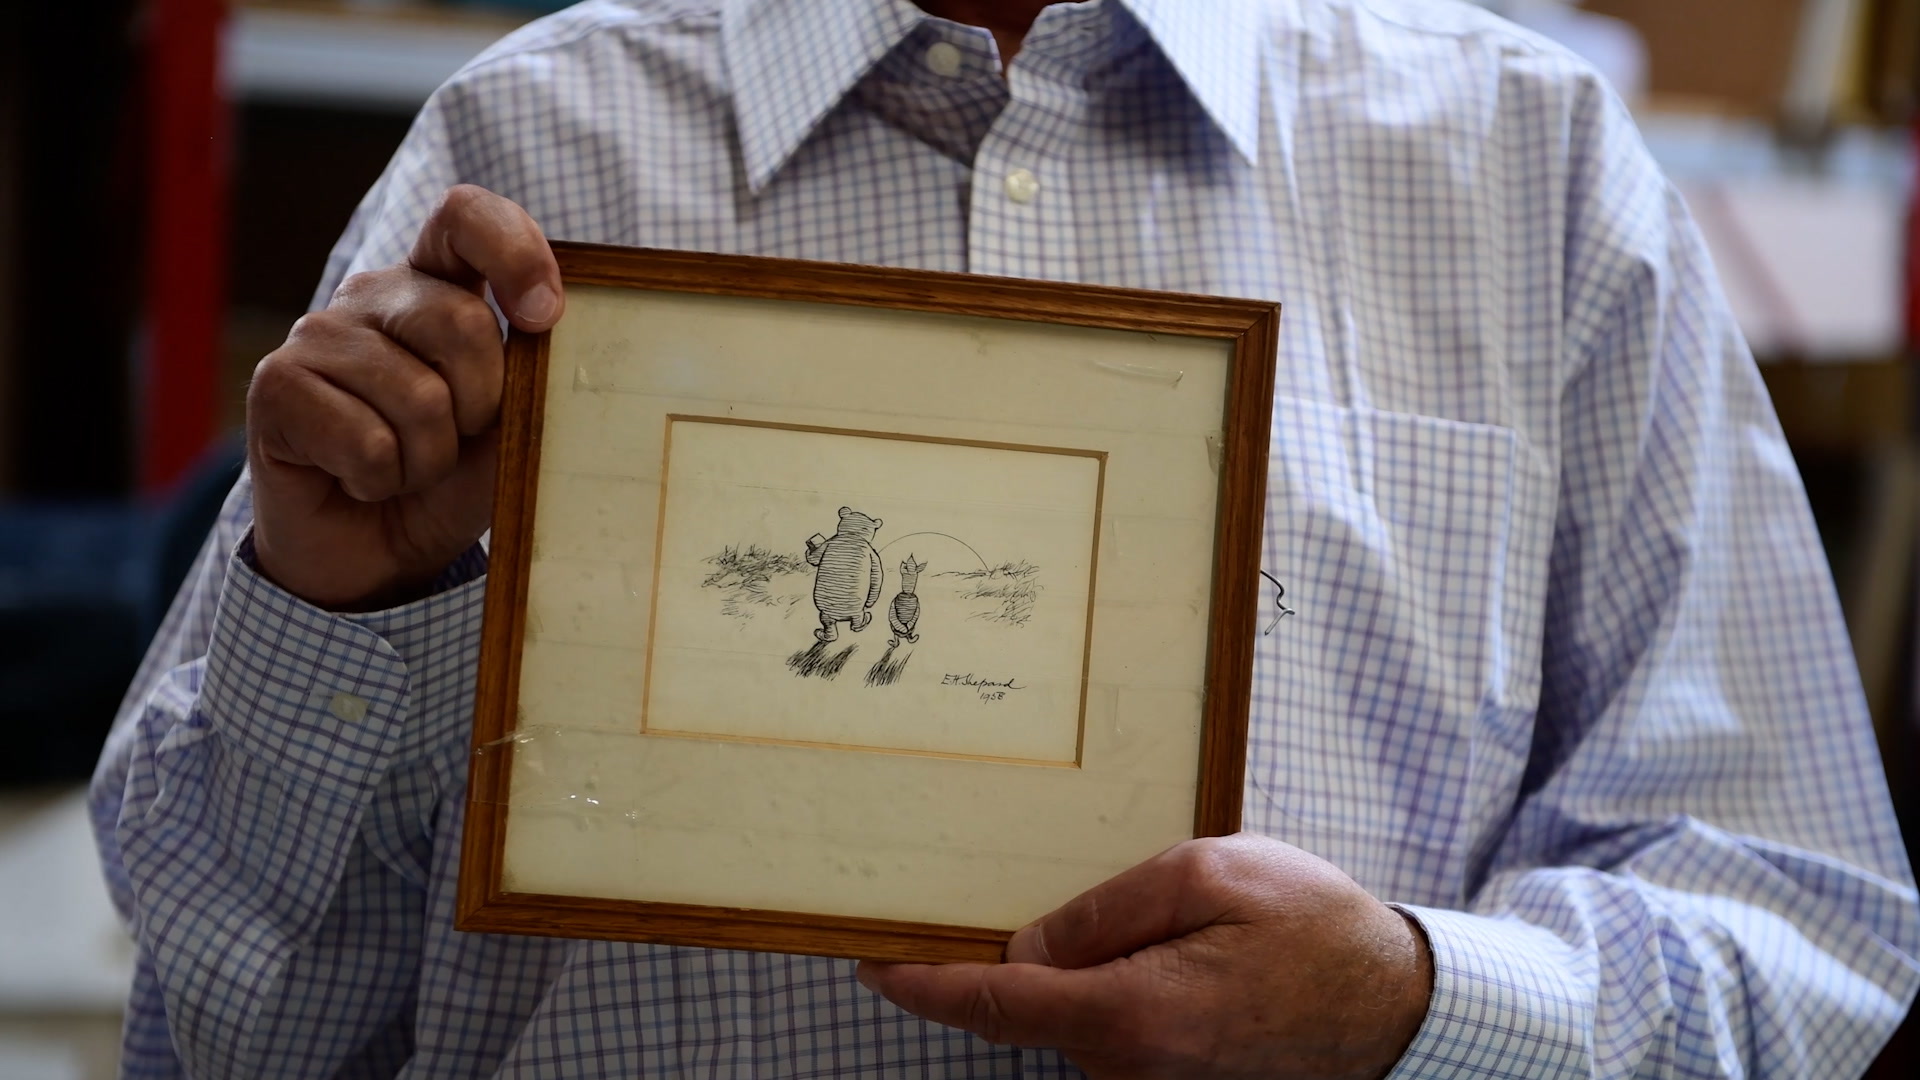 Long-lost Winnie-the-Pooh Sketch Found Wrapped In An Old Tea Towel